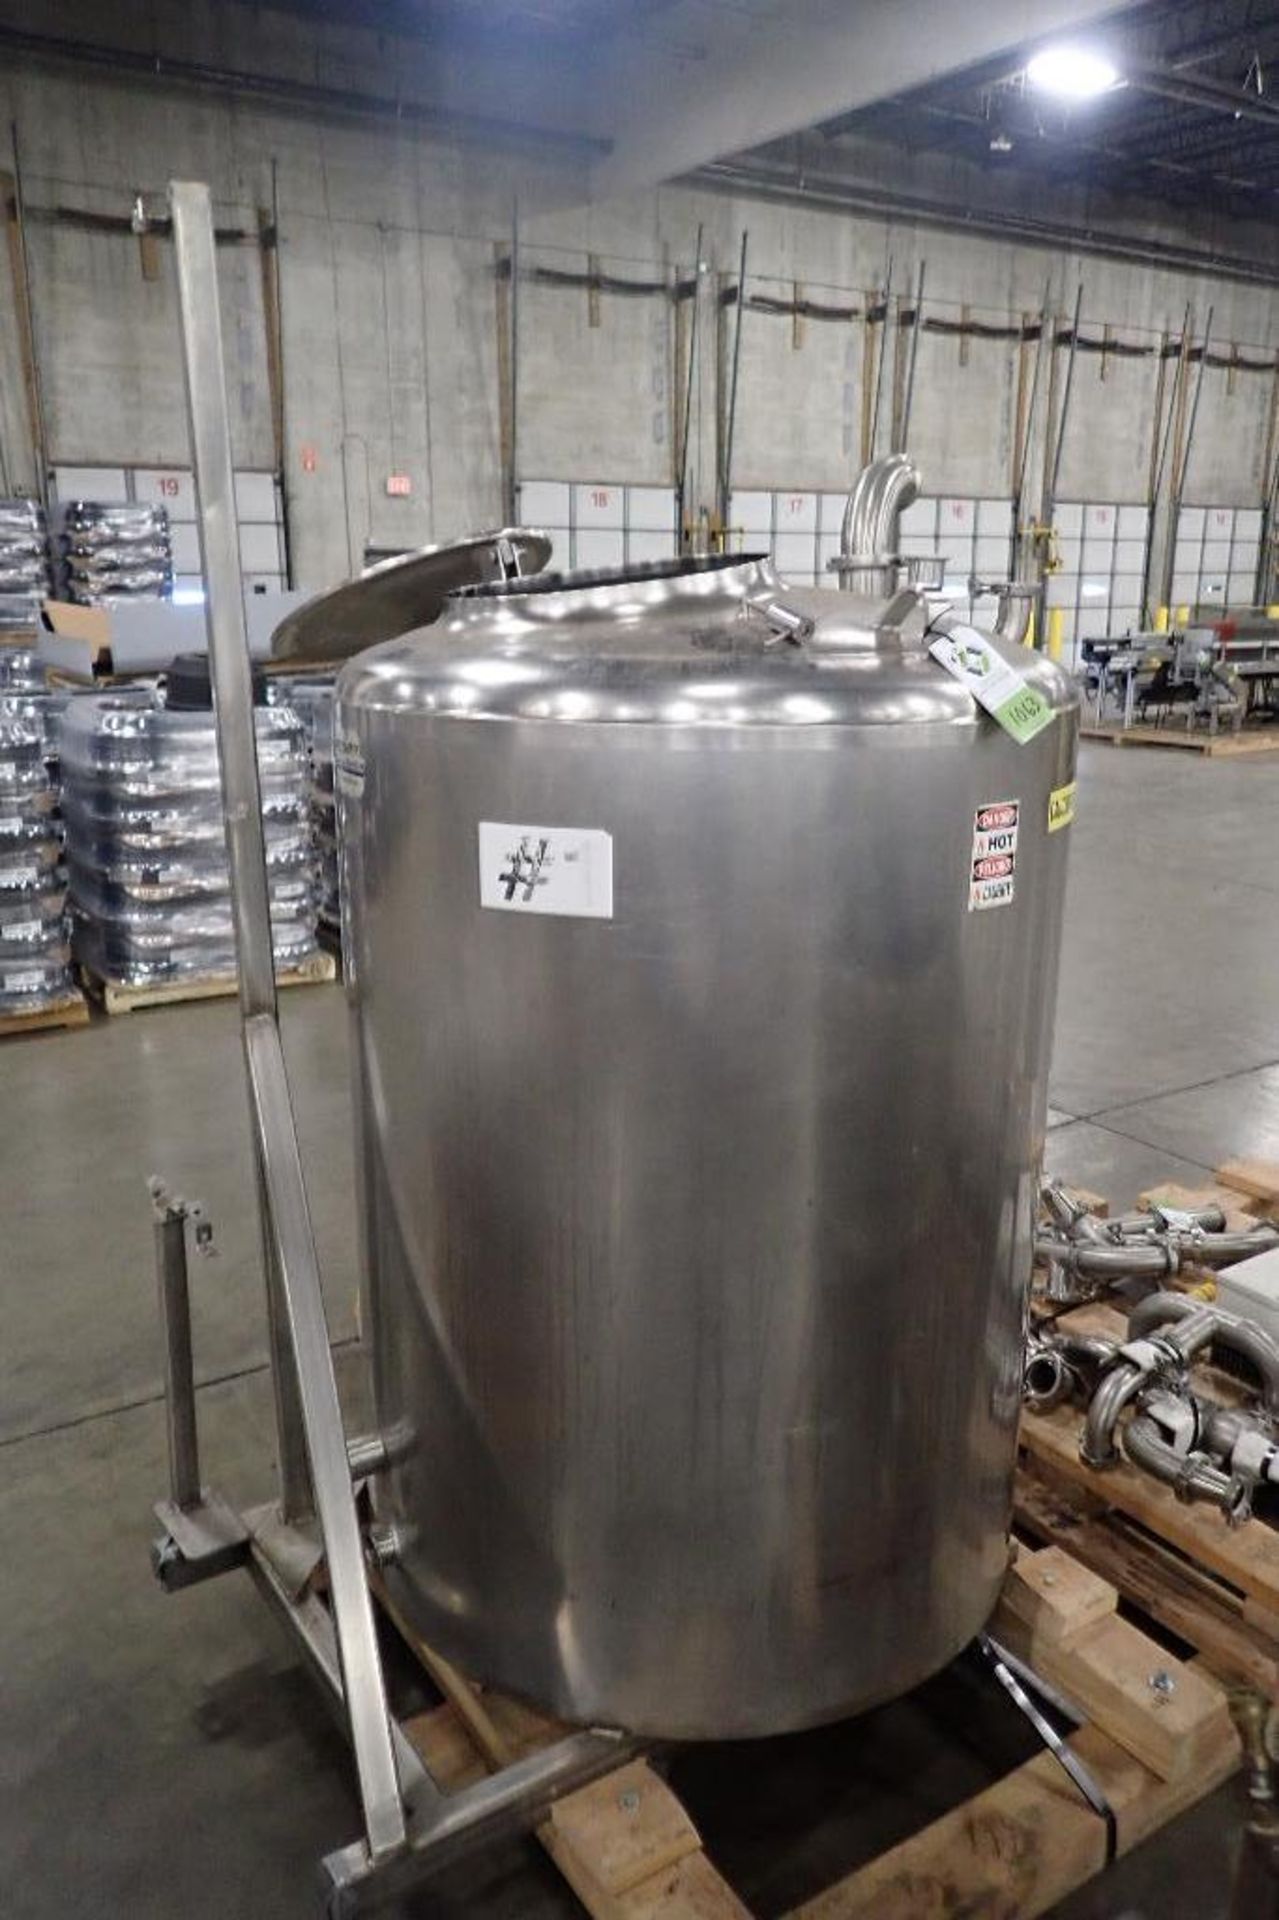 Feldmeier jacked tank, 44 in. dia x 55 in. tall, flat bottom, side bottom discharge, skid mounted on - Image 2 of 15